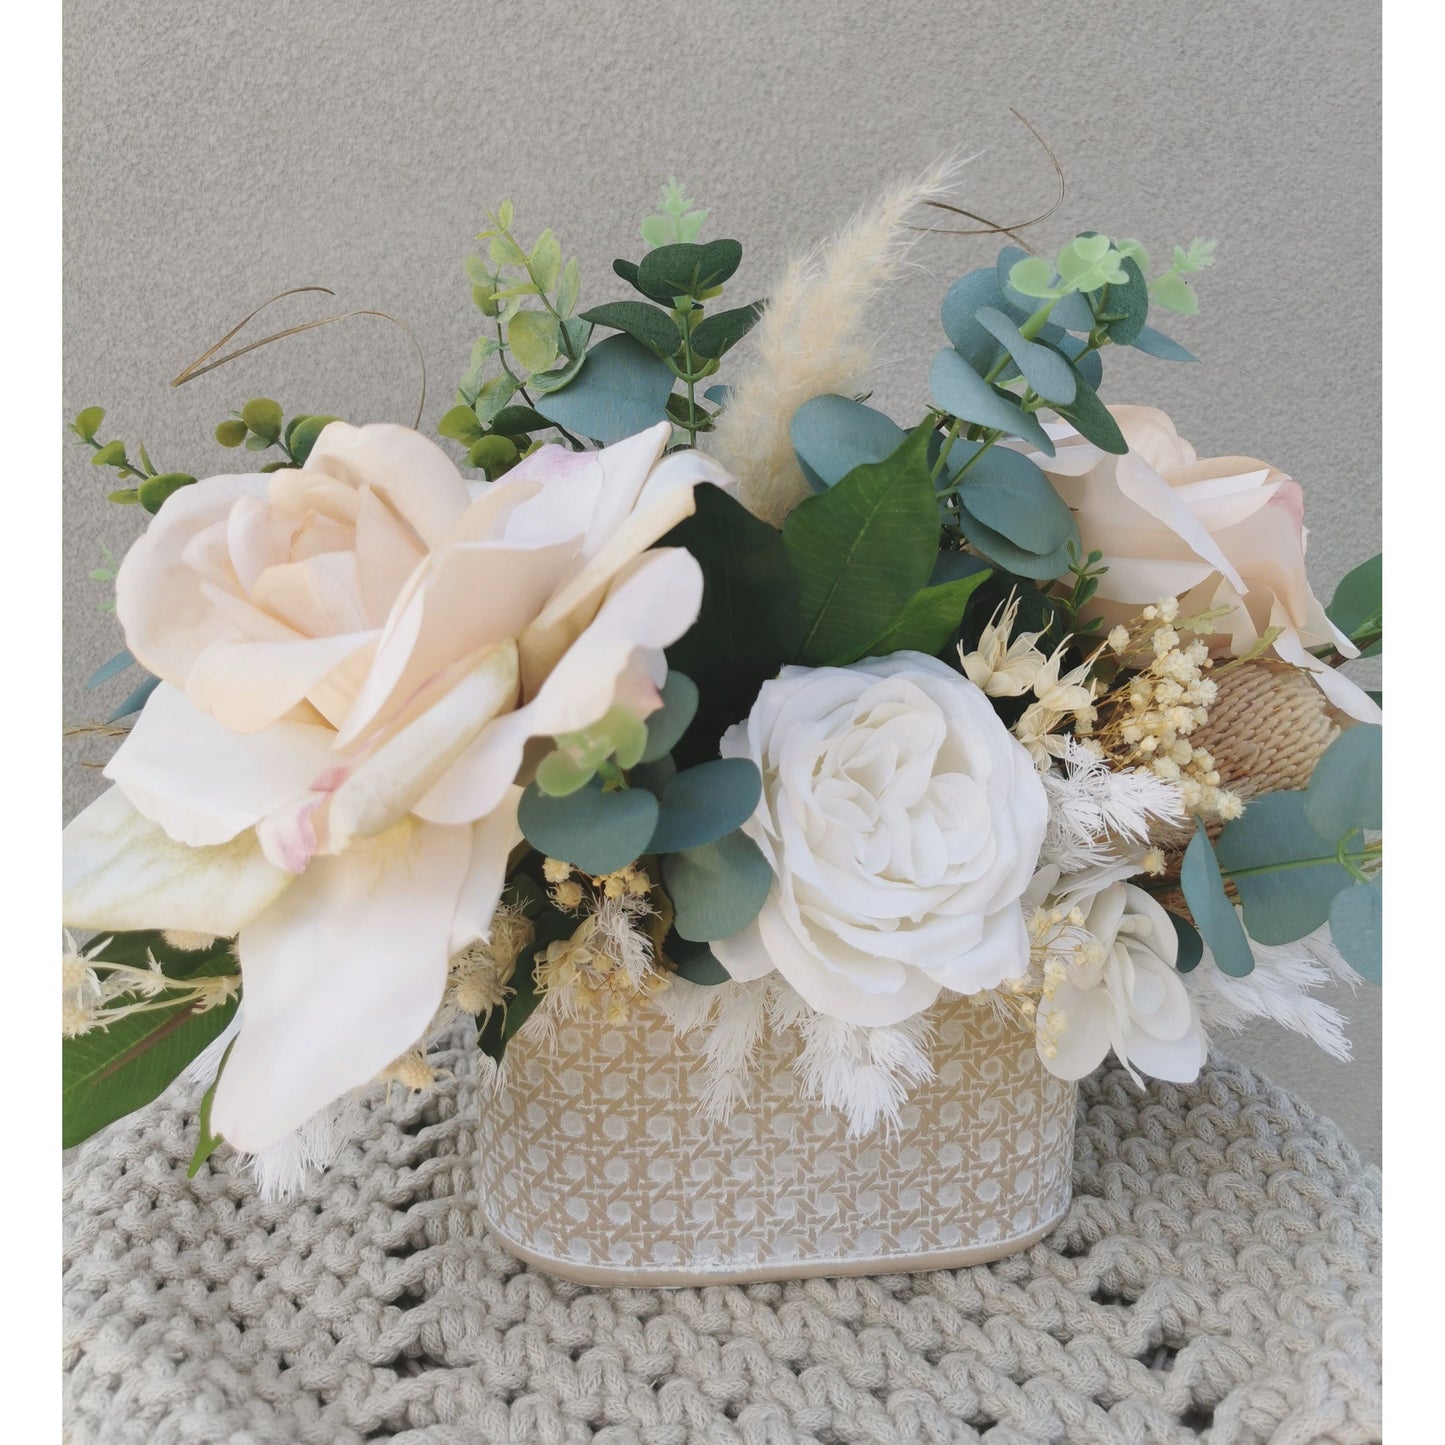 Dried, preserved and artificial flowers in colours green, white and neutral and set in to a rustic trough style pot. Picture is taken of the flower arrangement on a table against a blank wall showing the reverse side of the arrangement